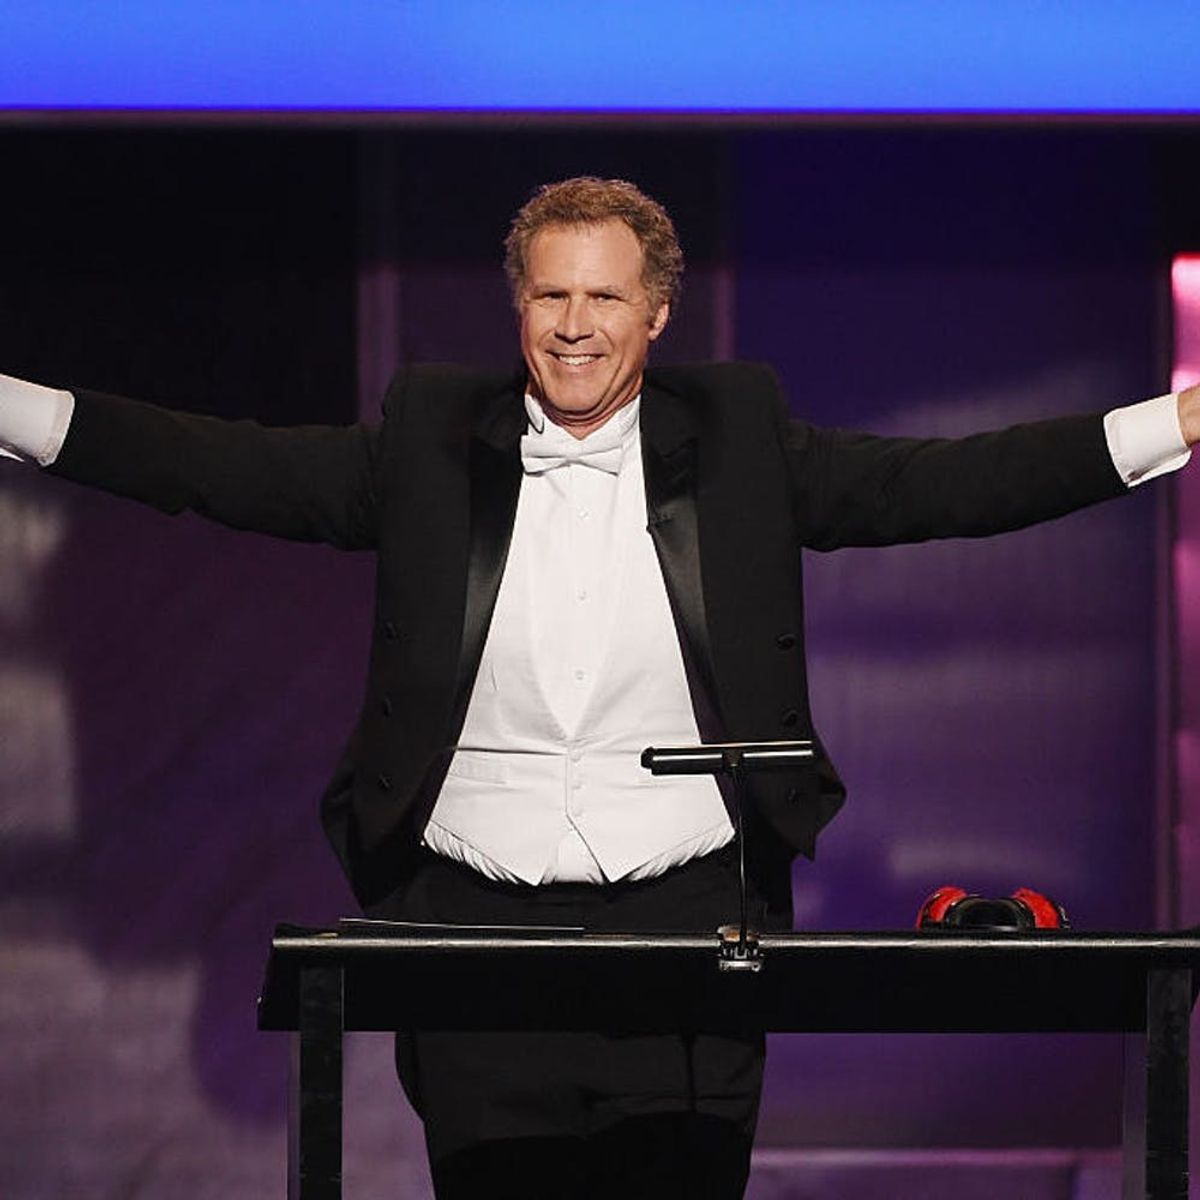 Will Ferrell Presented a College Student with $100,000 for Tuition